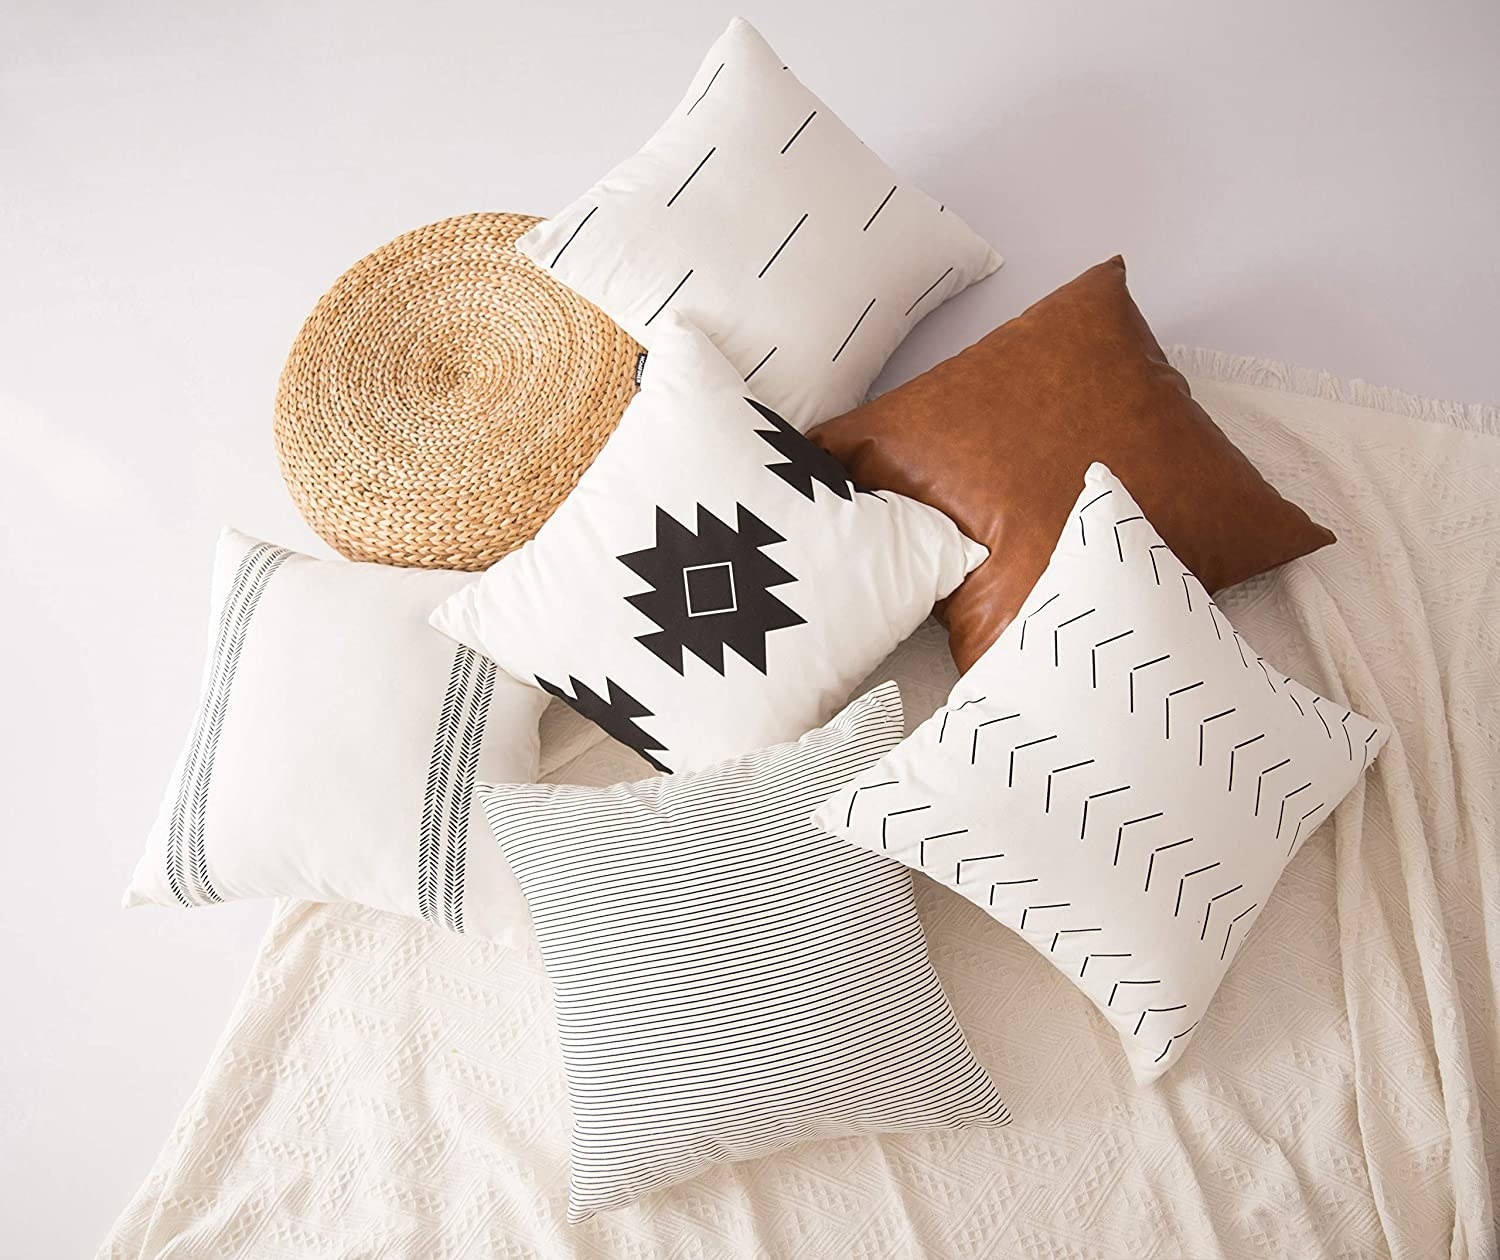 throw pillows with various patterns arranged on a blanket 